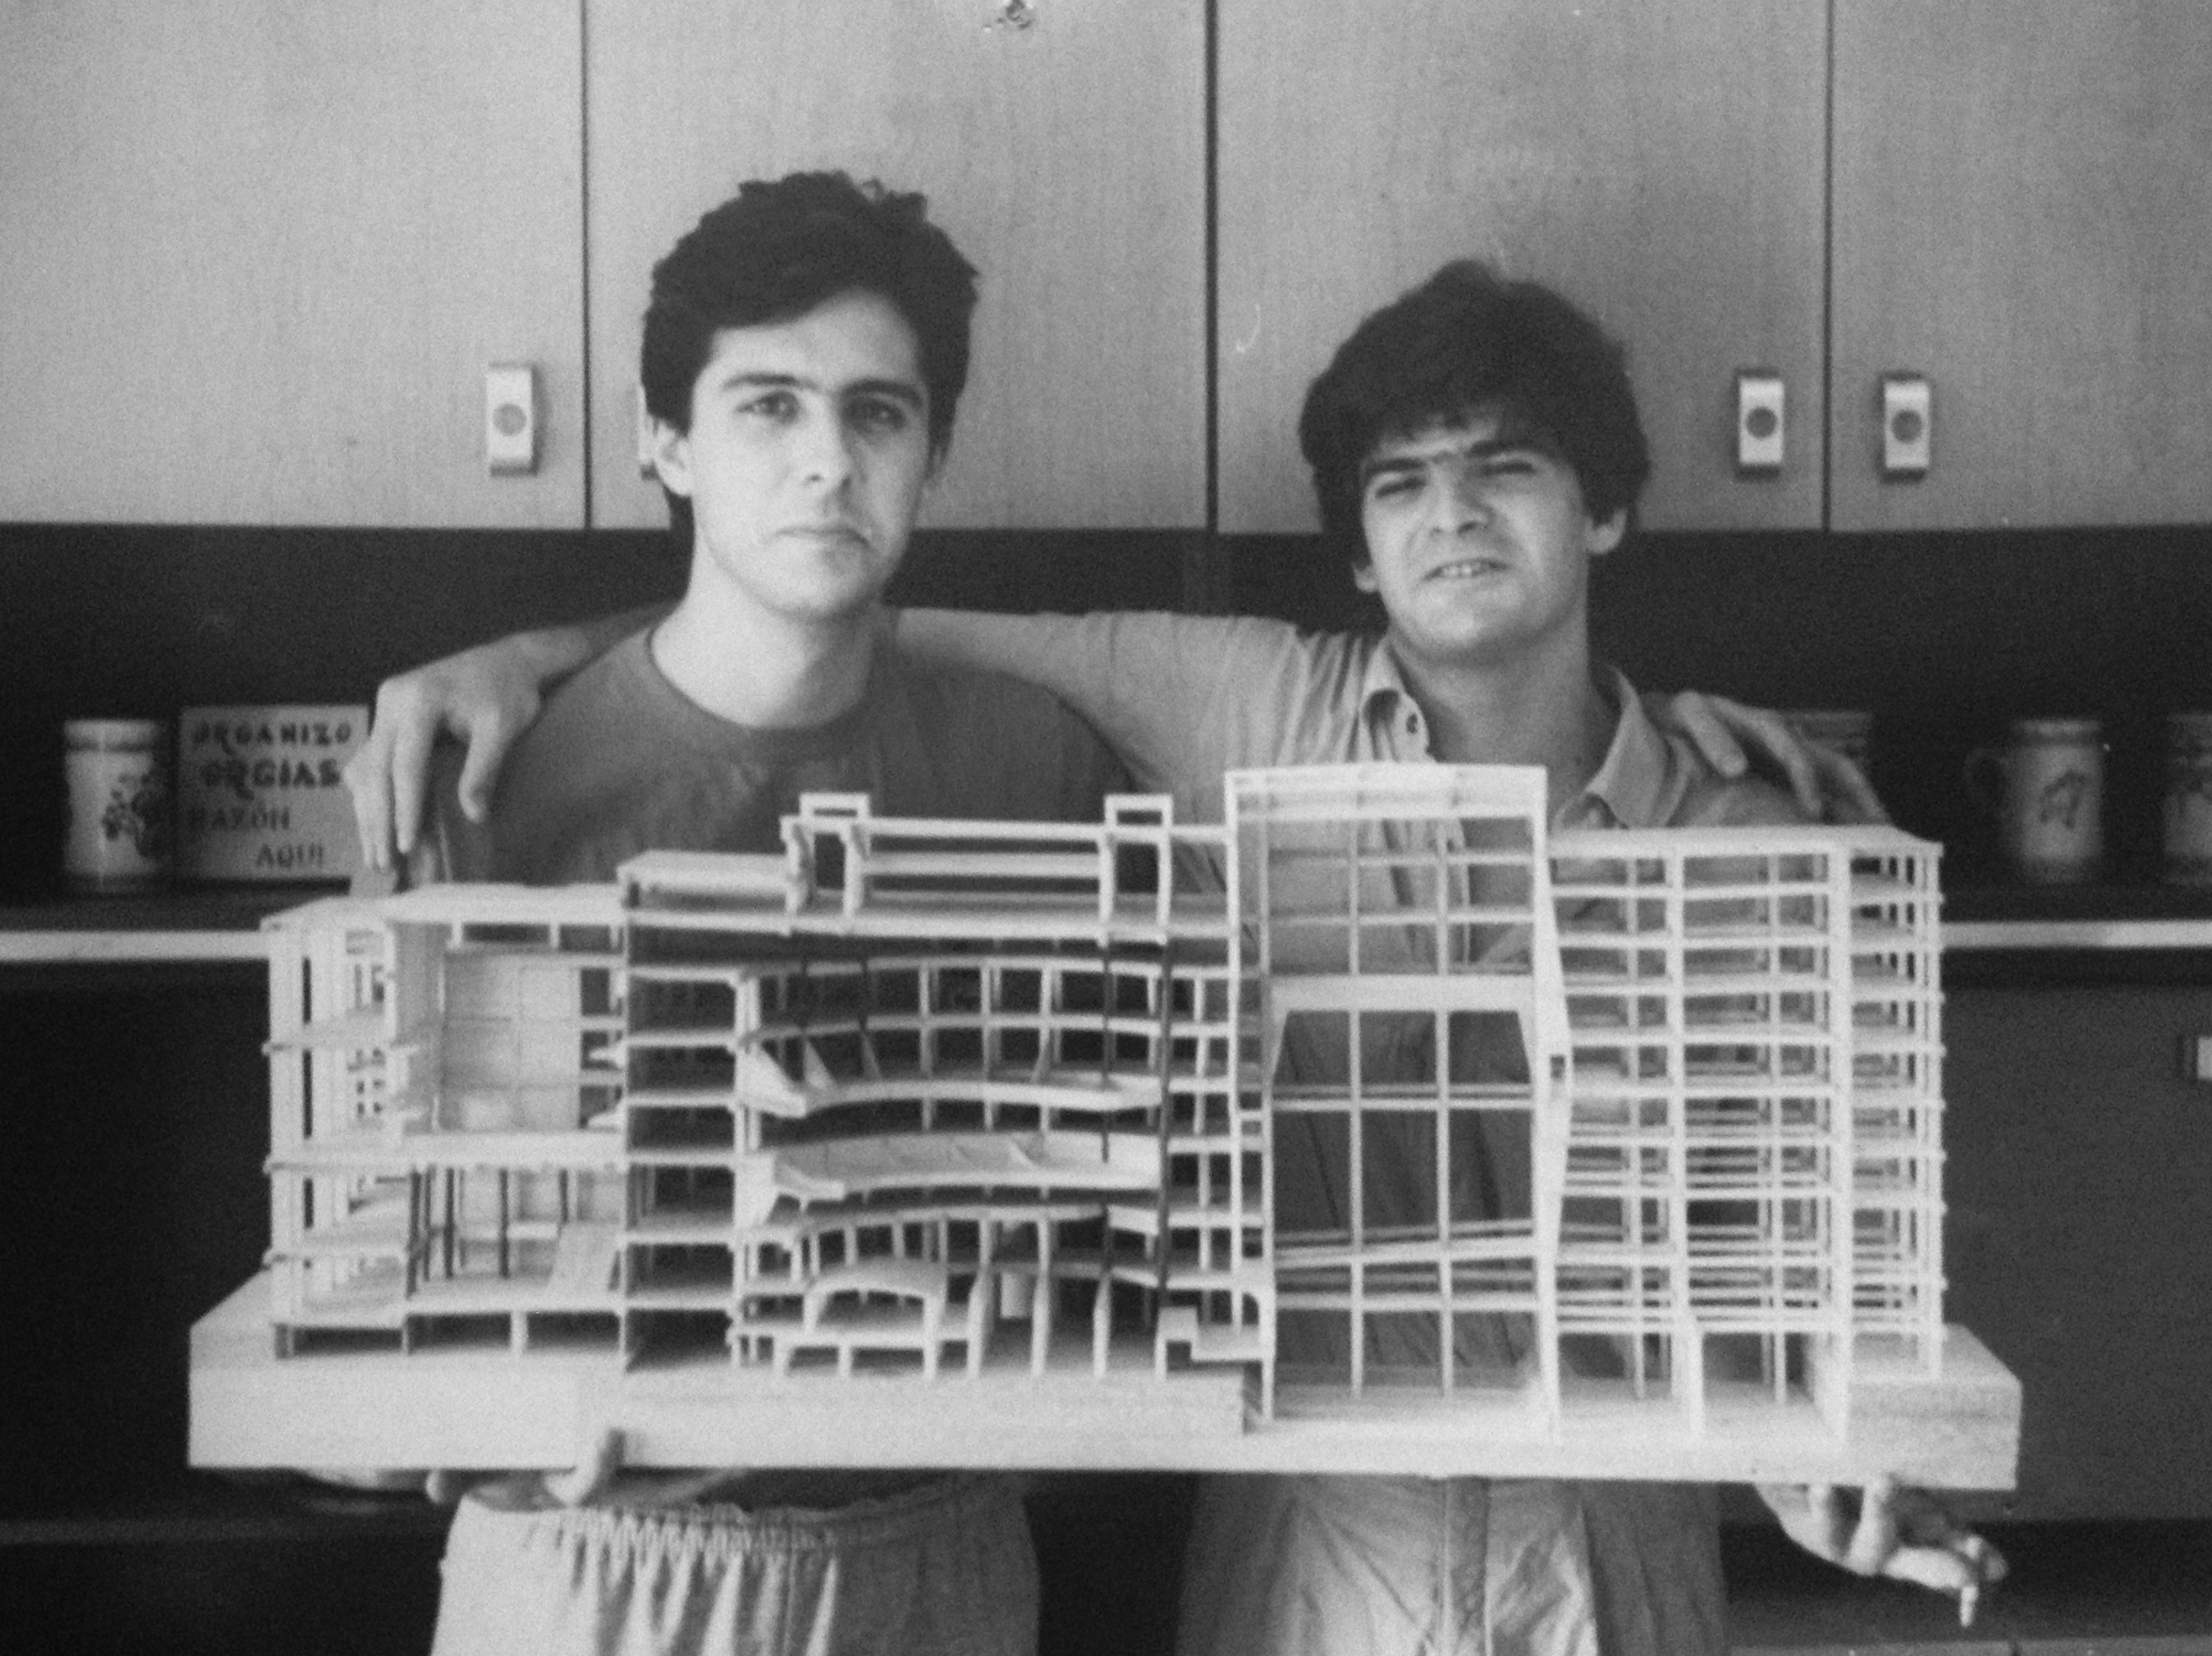 Juan Gayarre and Carlos Tejada with an architectural model on their hands